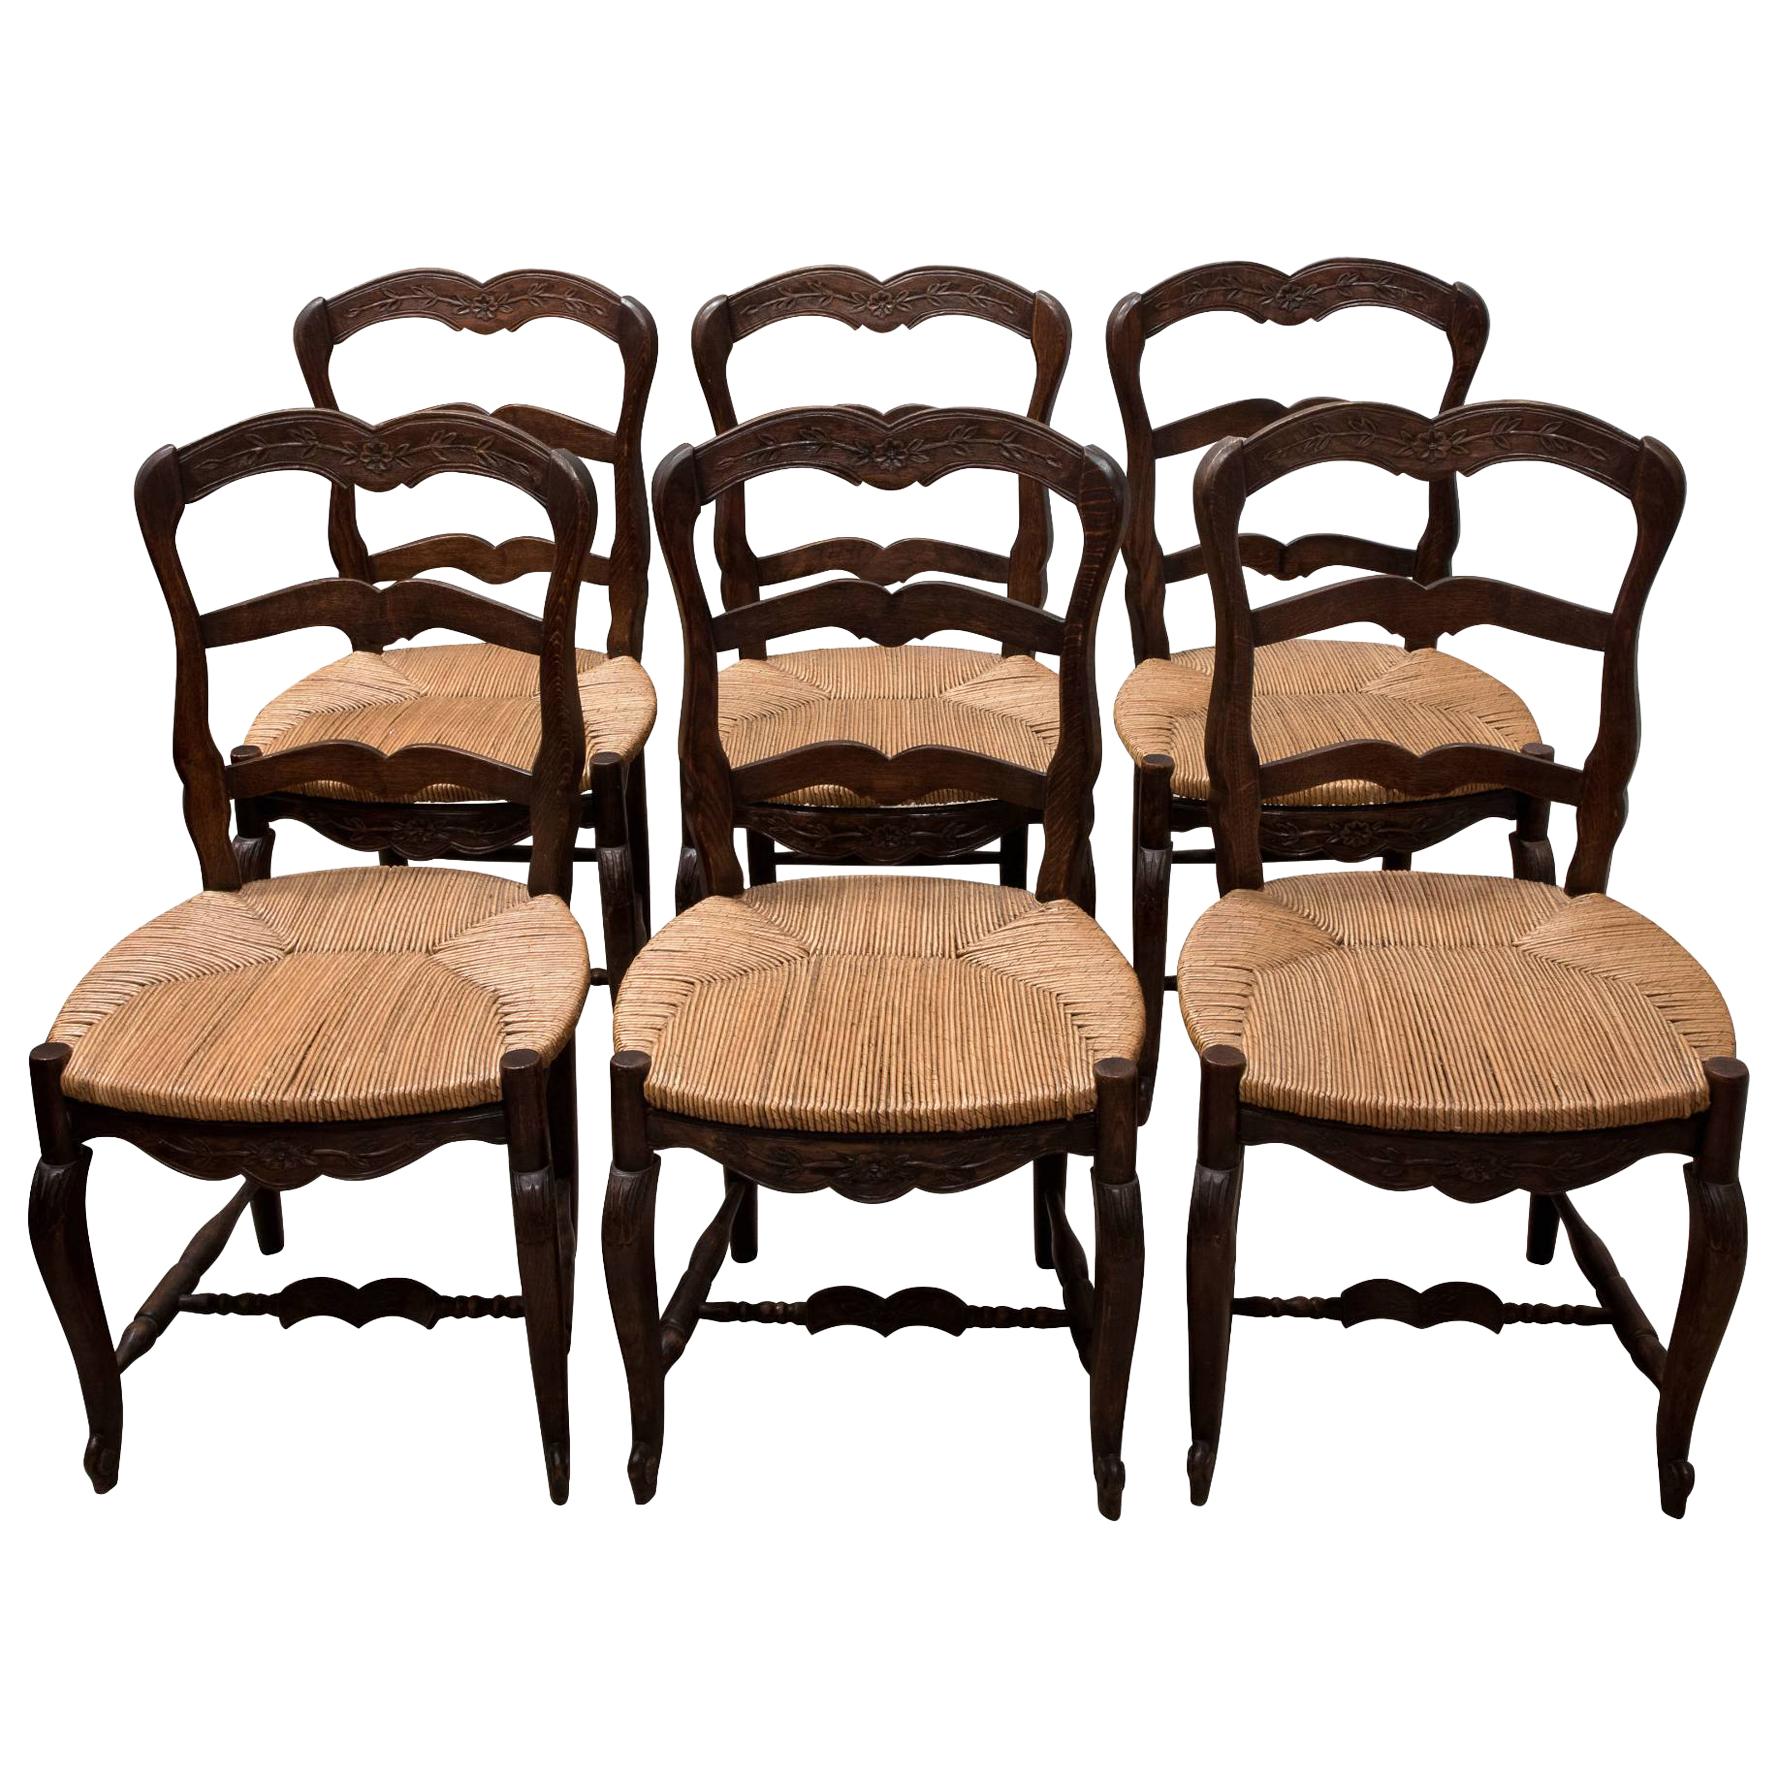 Set of 6 French Ladder Back Chairs c1920